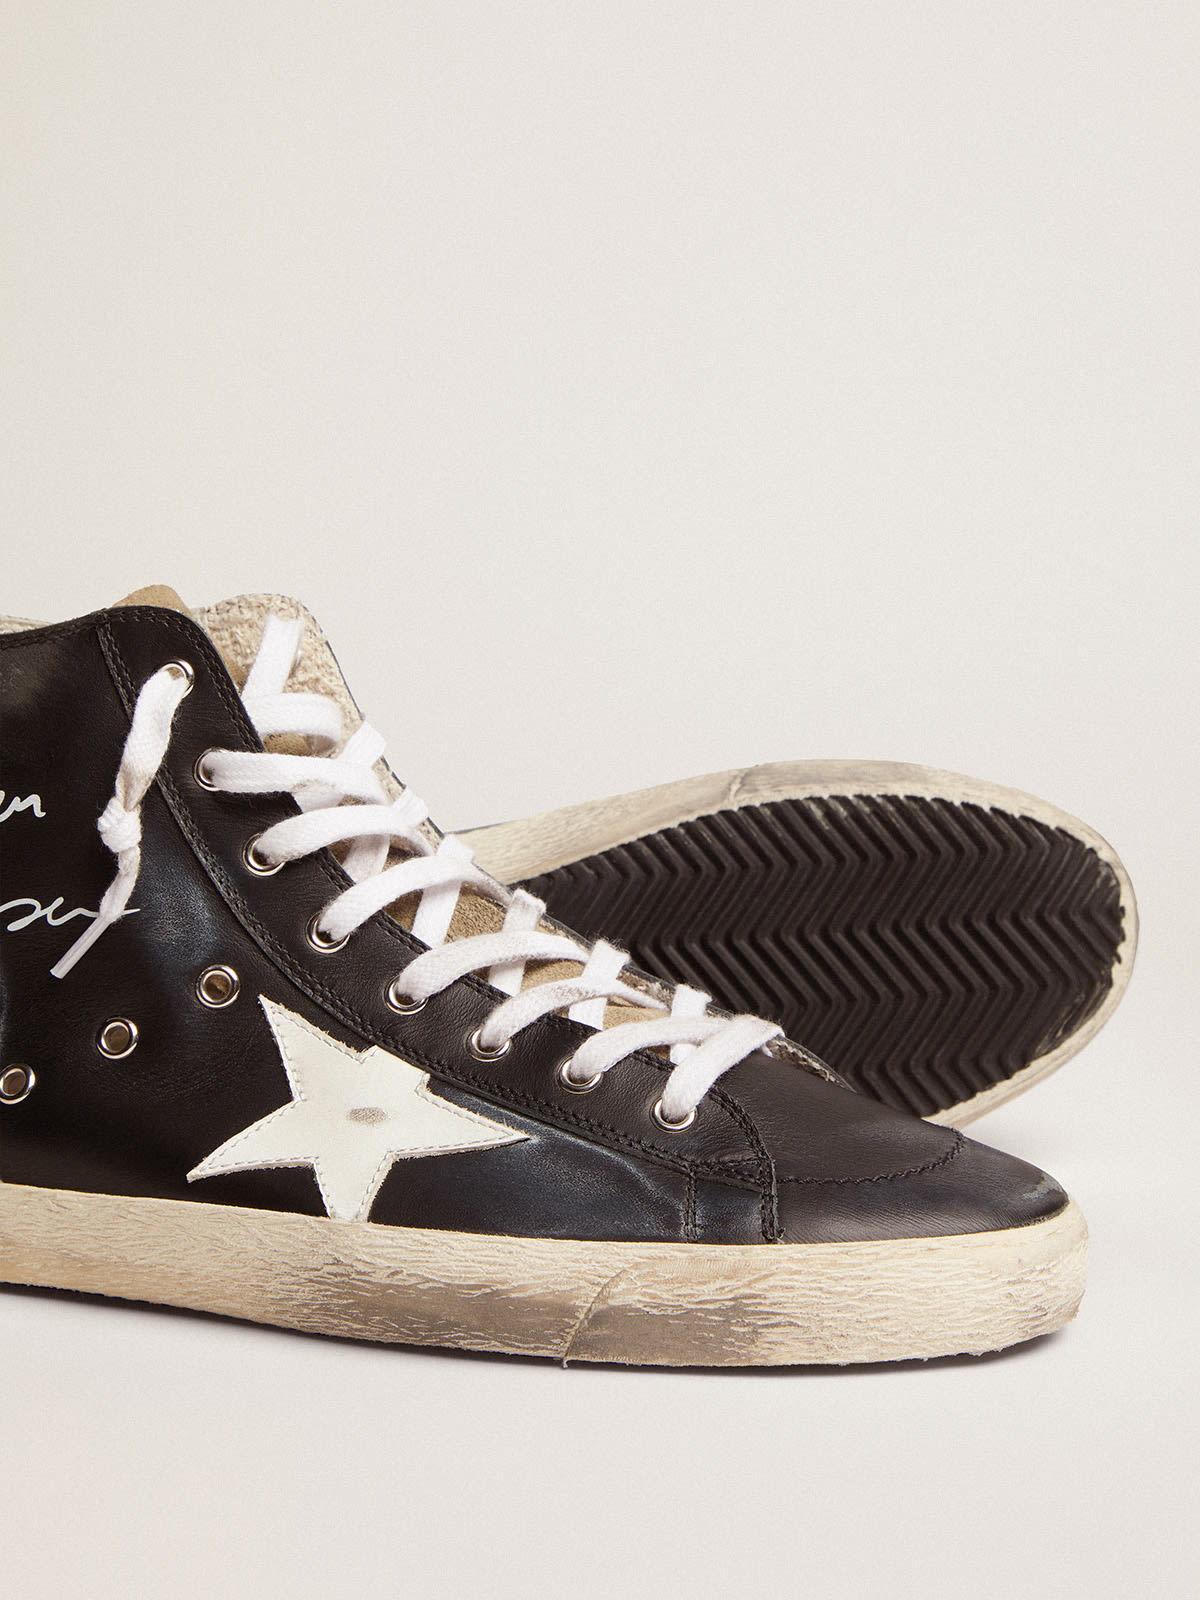 Golden Goose - Francy sneakers with black leather upper and white leather star in 